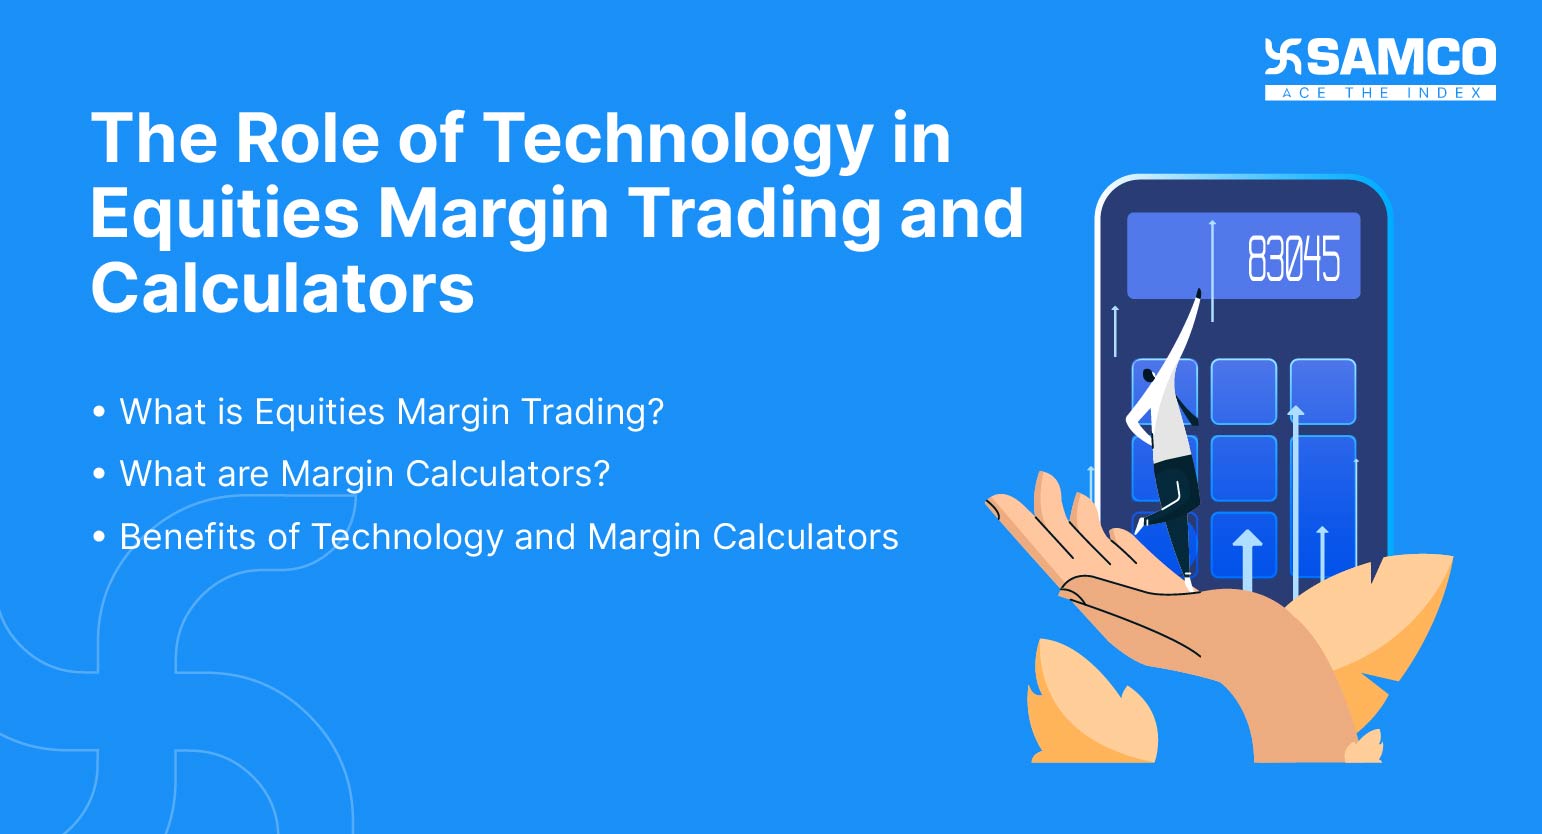 The Role of Technology in Equities Margin Trading and Calculators